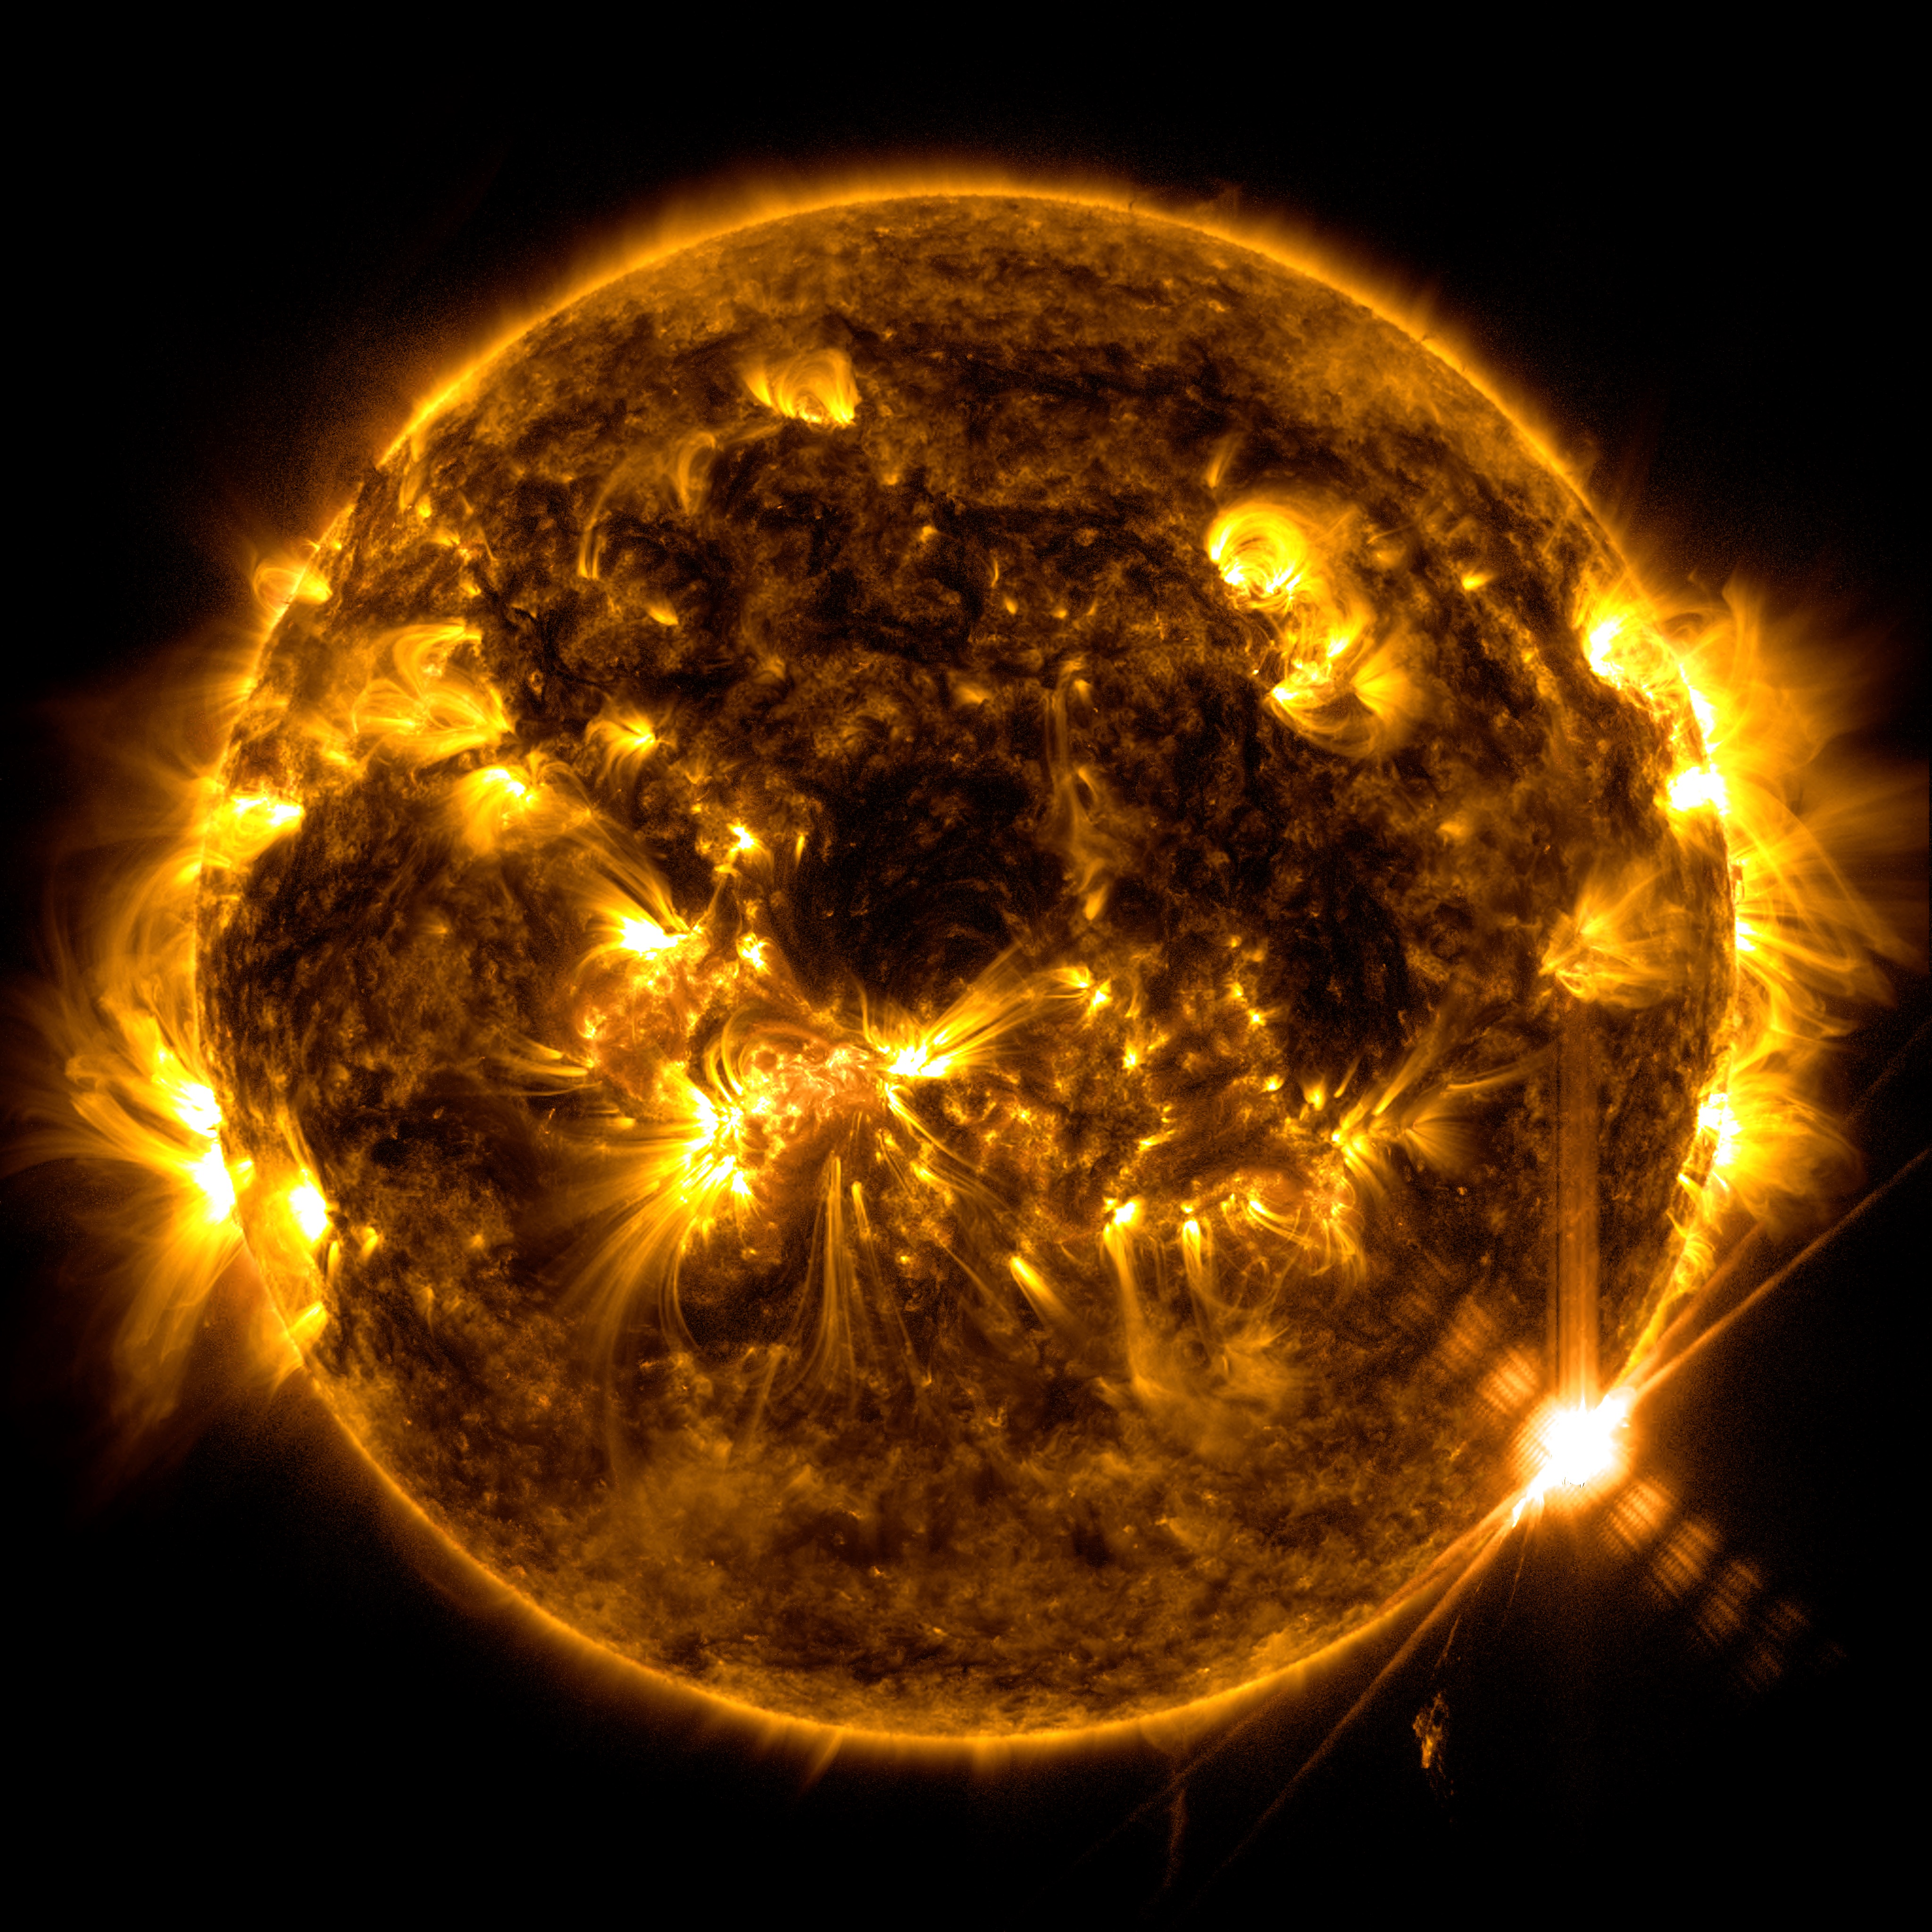 NASA’s Solar Dynamics Observatory captured this image of a solar flare – as seen in the bright flash on the lower right – on Feb. 9, 2024. The image shows a blend of  171 Angstrom and 131 Angstrom light, subsets of extreme ultraviolet light that highlight the plasma loops in the corona and the extremely hot material in flares, respectively. Credit: NASA/SDO